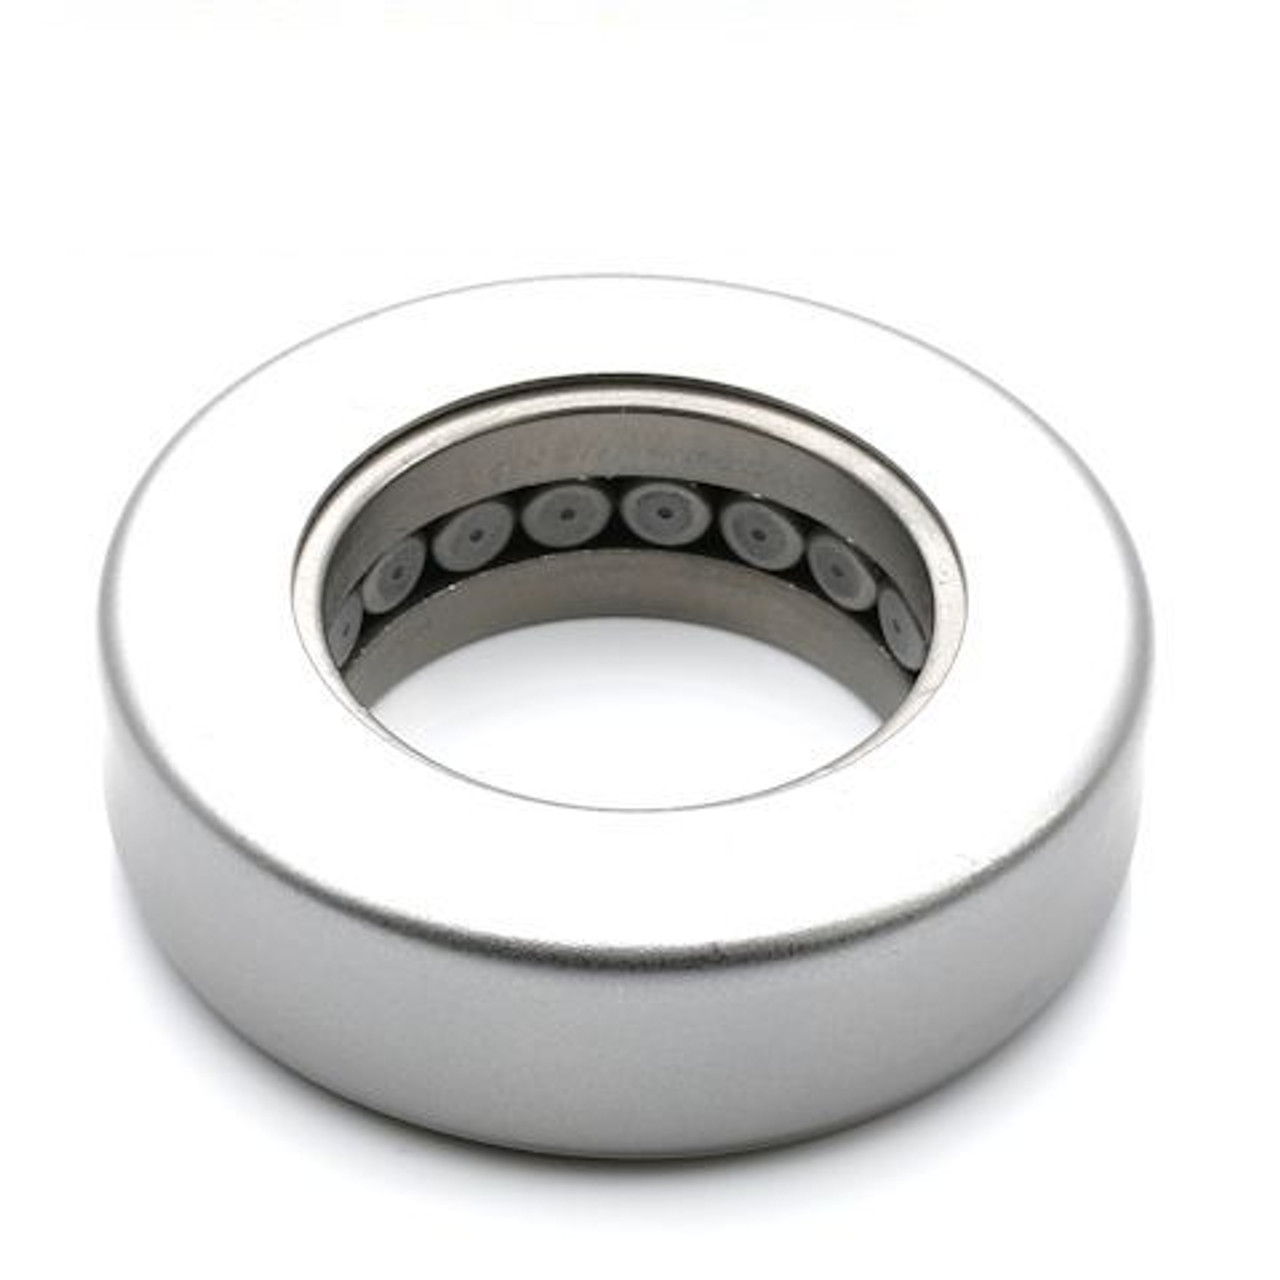 Timken® Stamped Race Thrust Bearing  T177-904A1